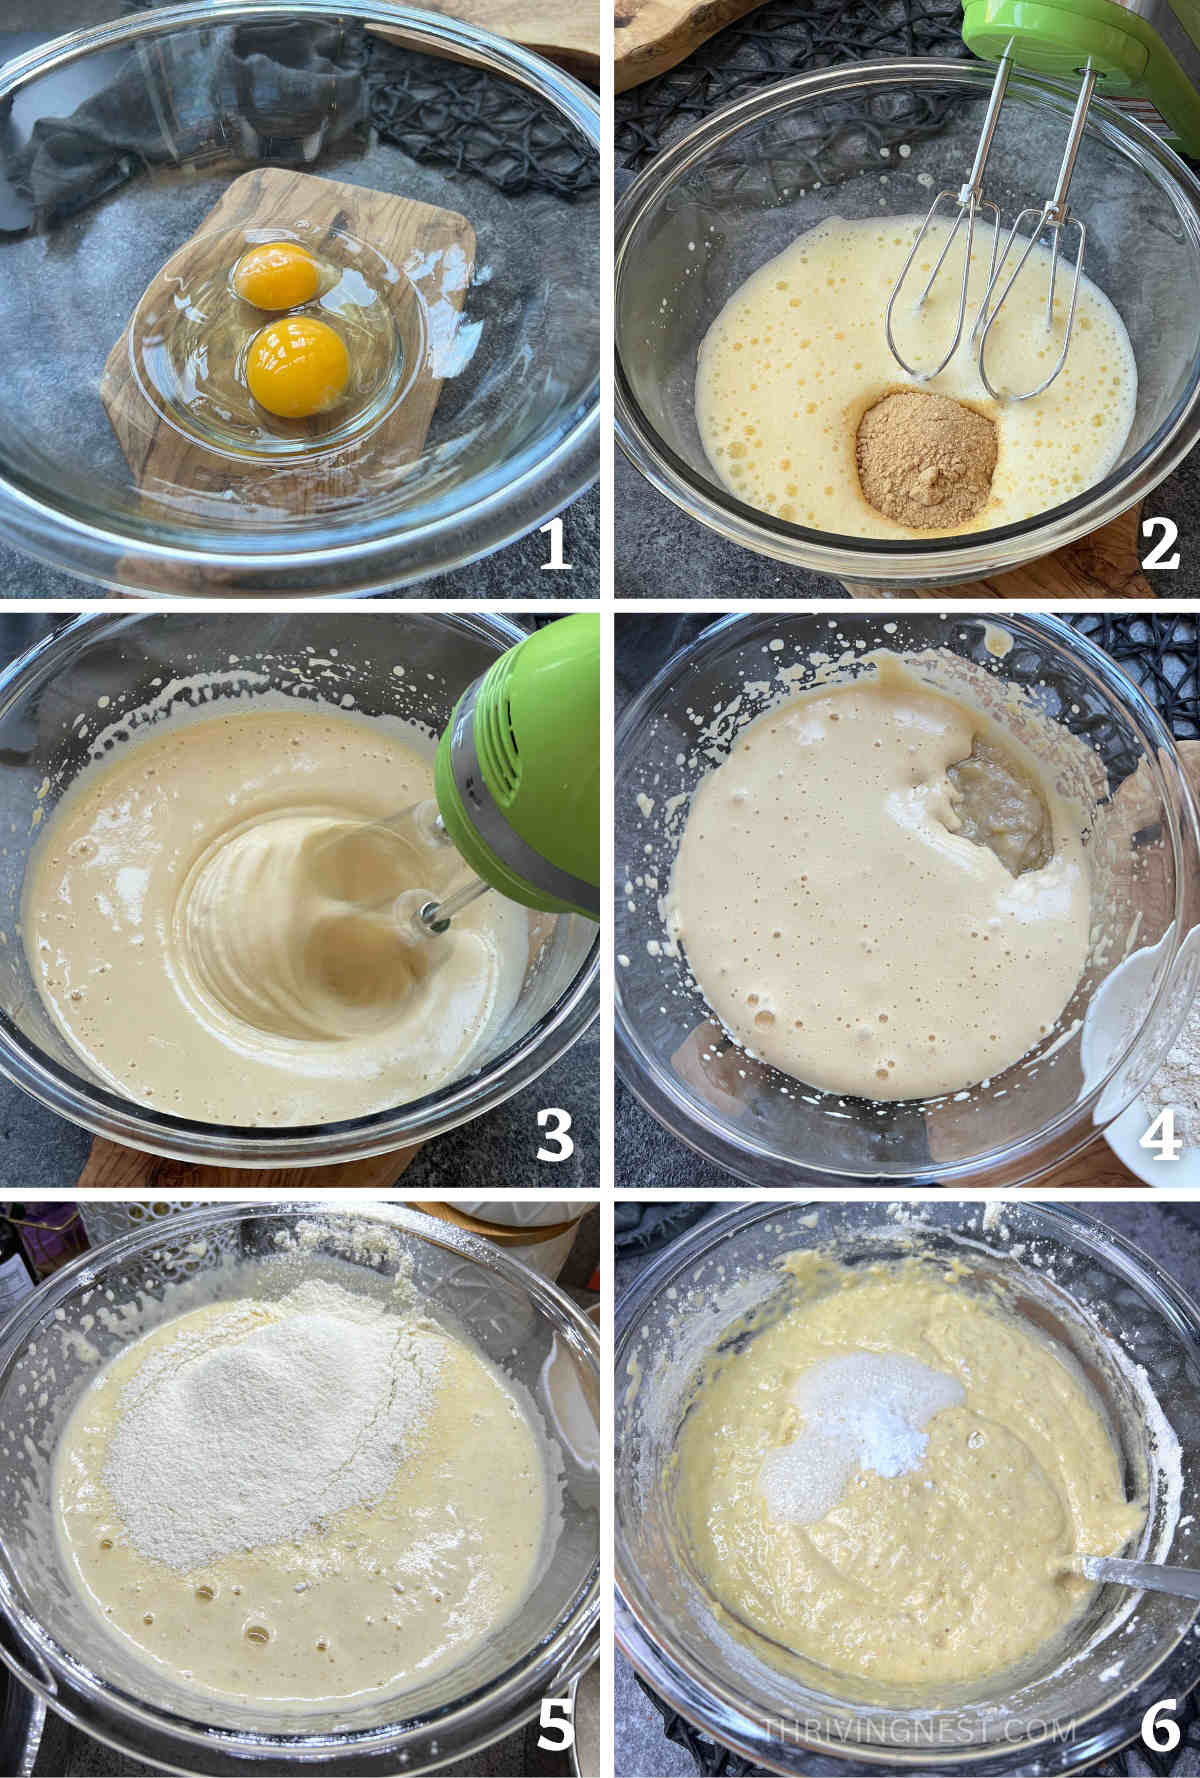 Process shots showing how to make the batter for the first birthday cake: mixing the eggs